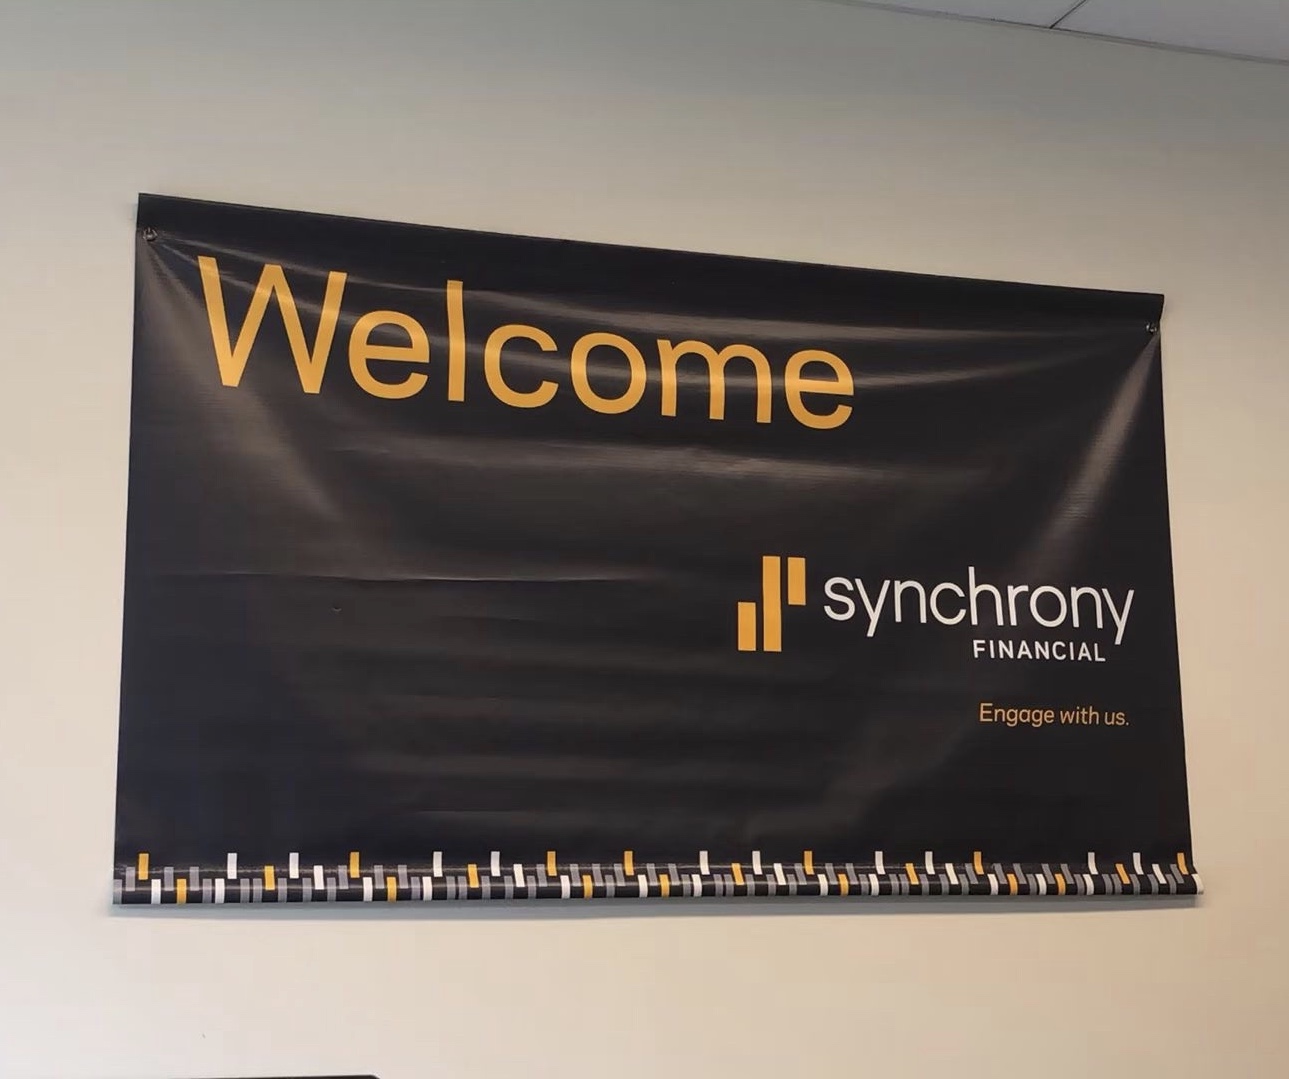 Welcome sign at the Synchrony Financial externship